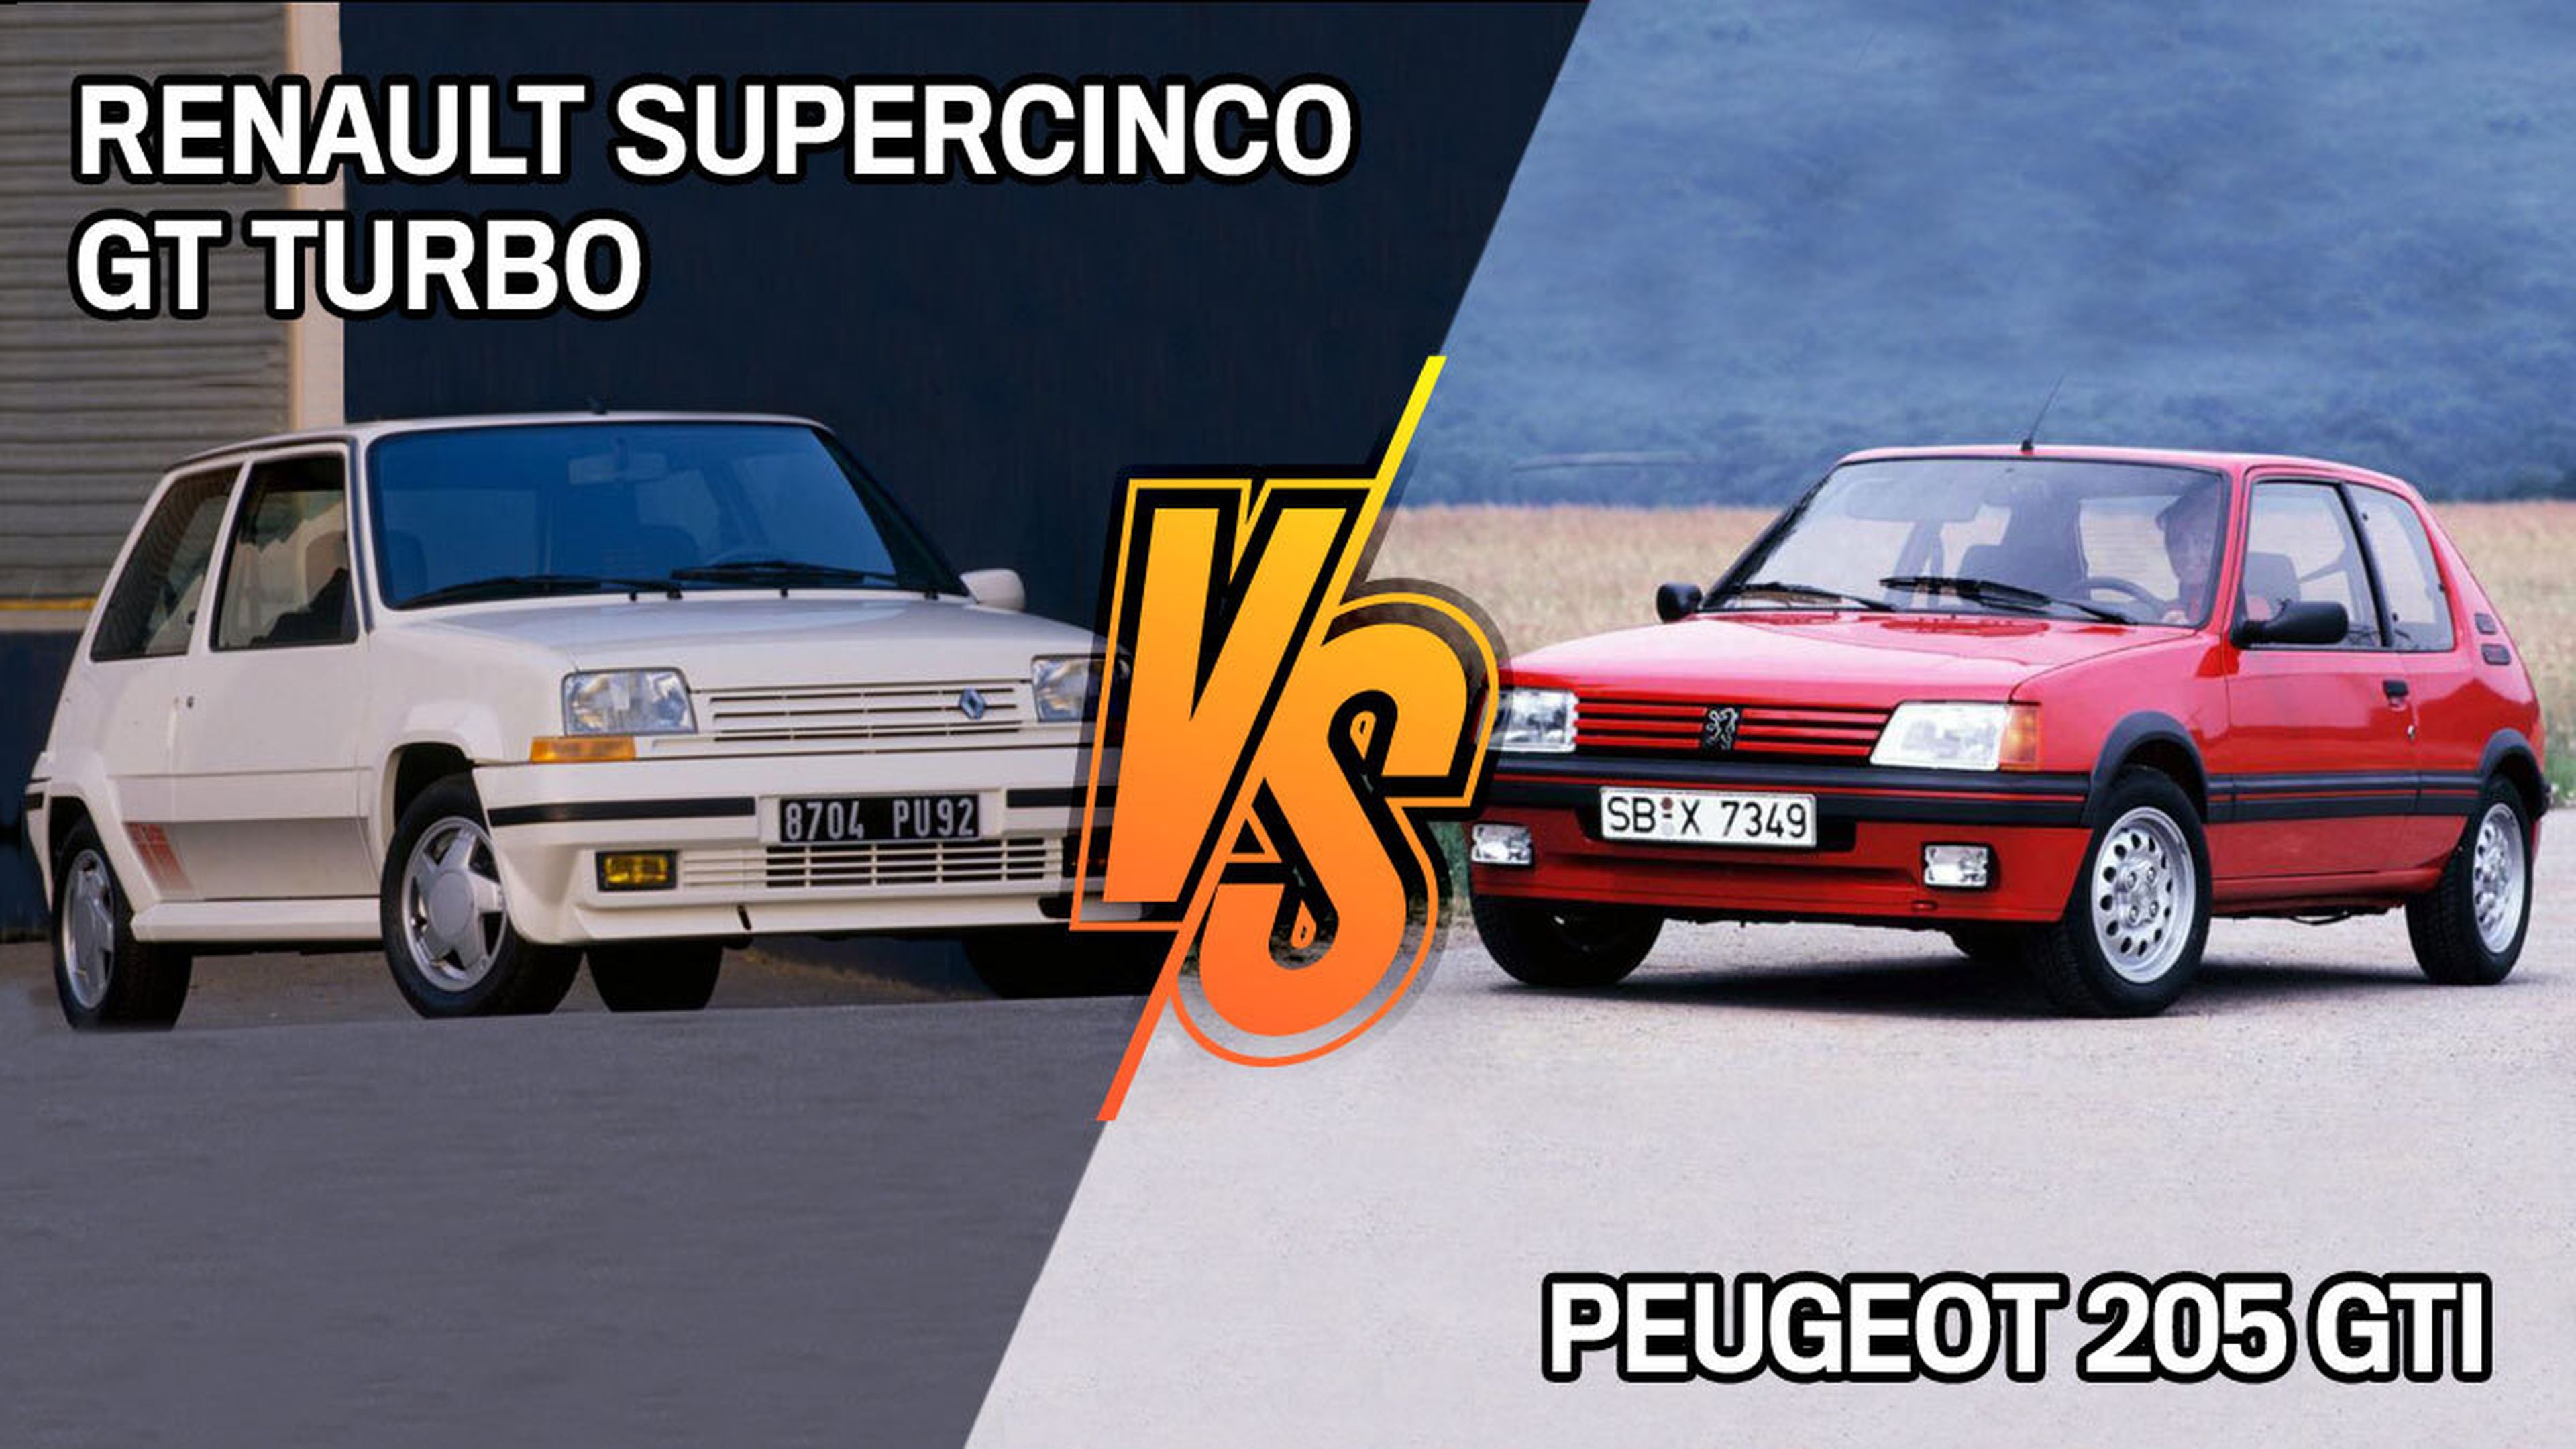 Compa oldie: Peugeot 205 GTI contra Renault Supercinco GT Turbo